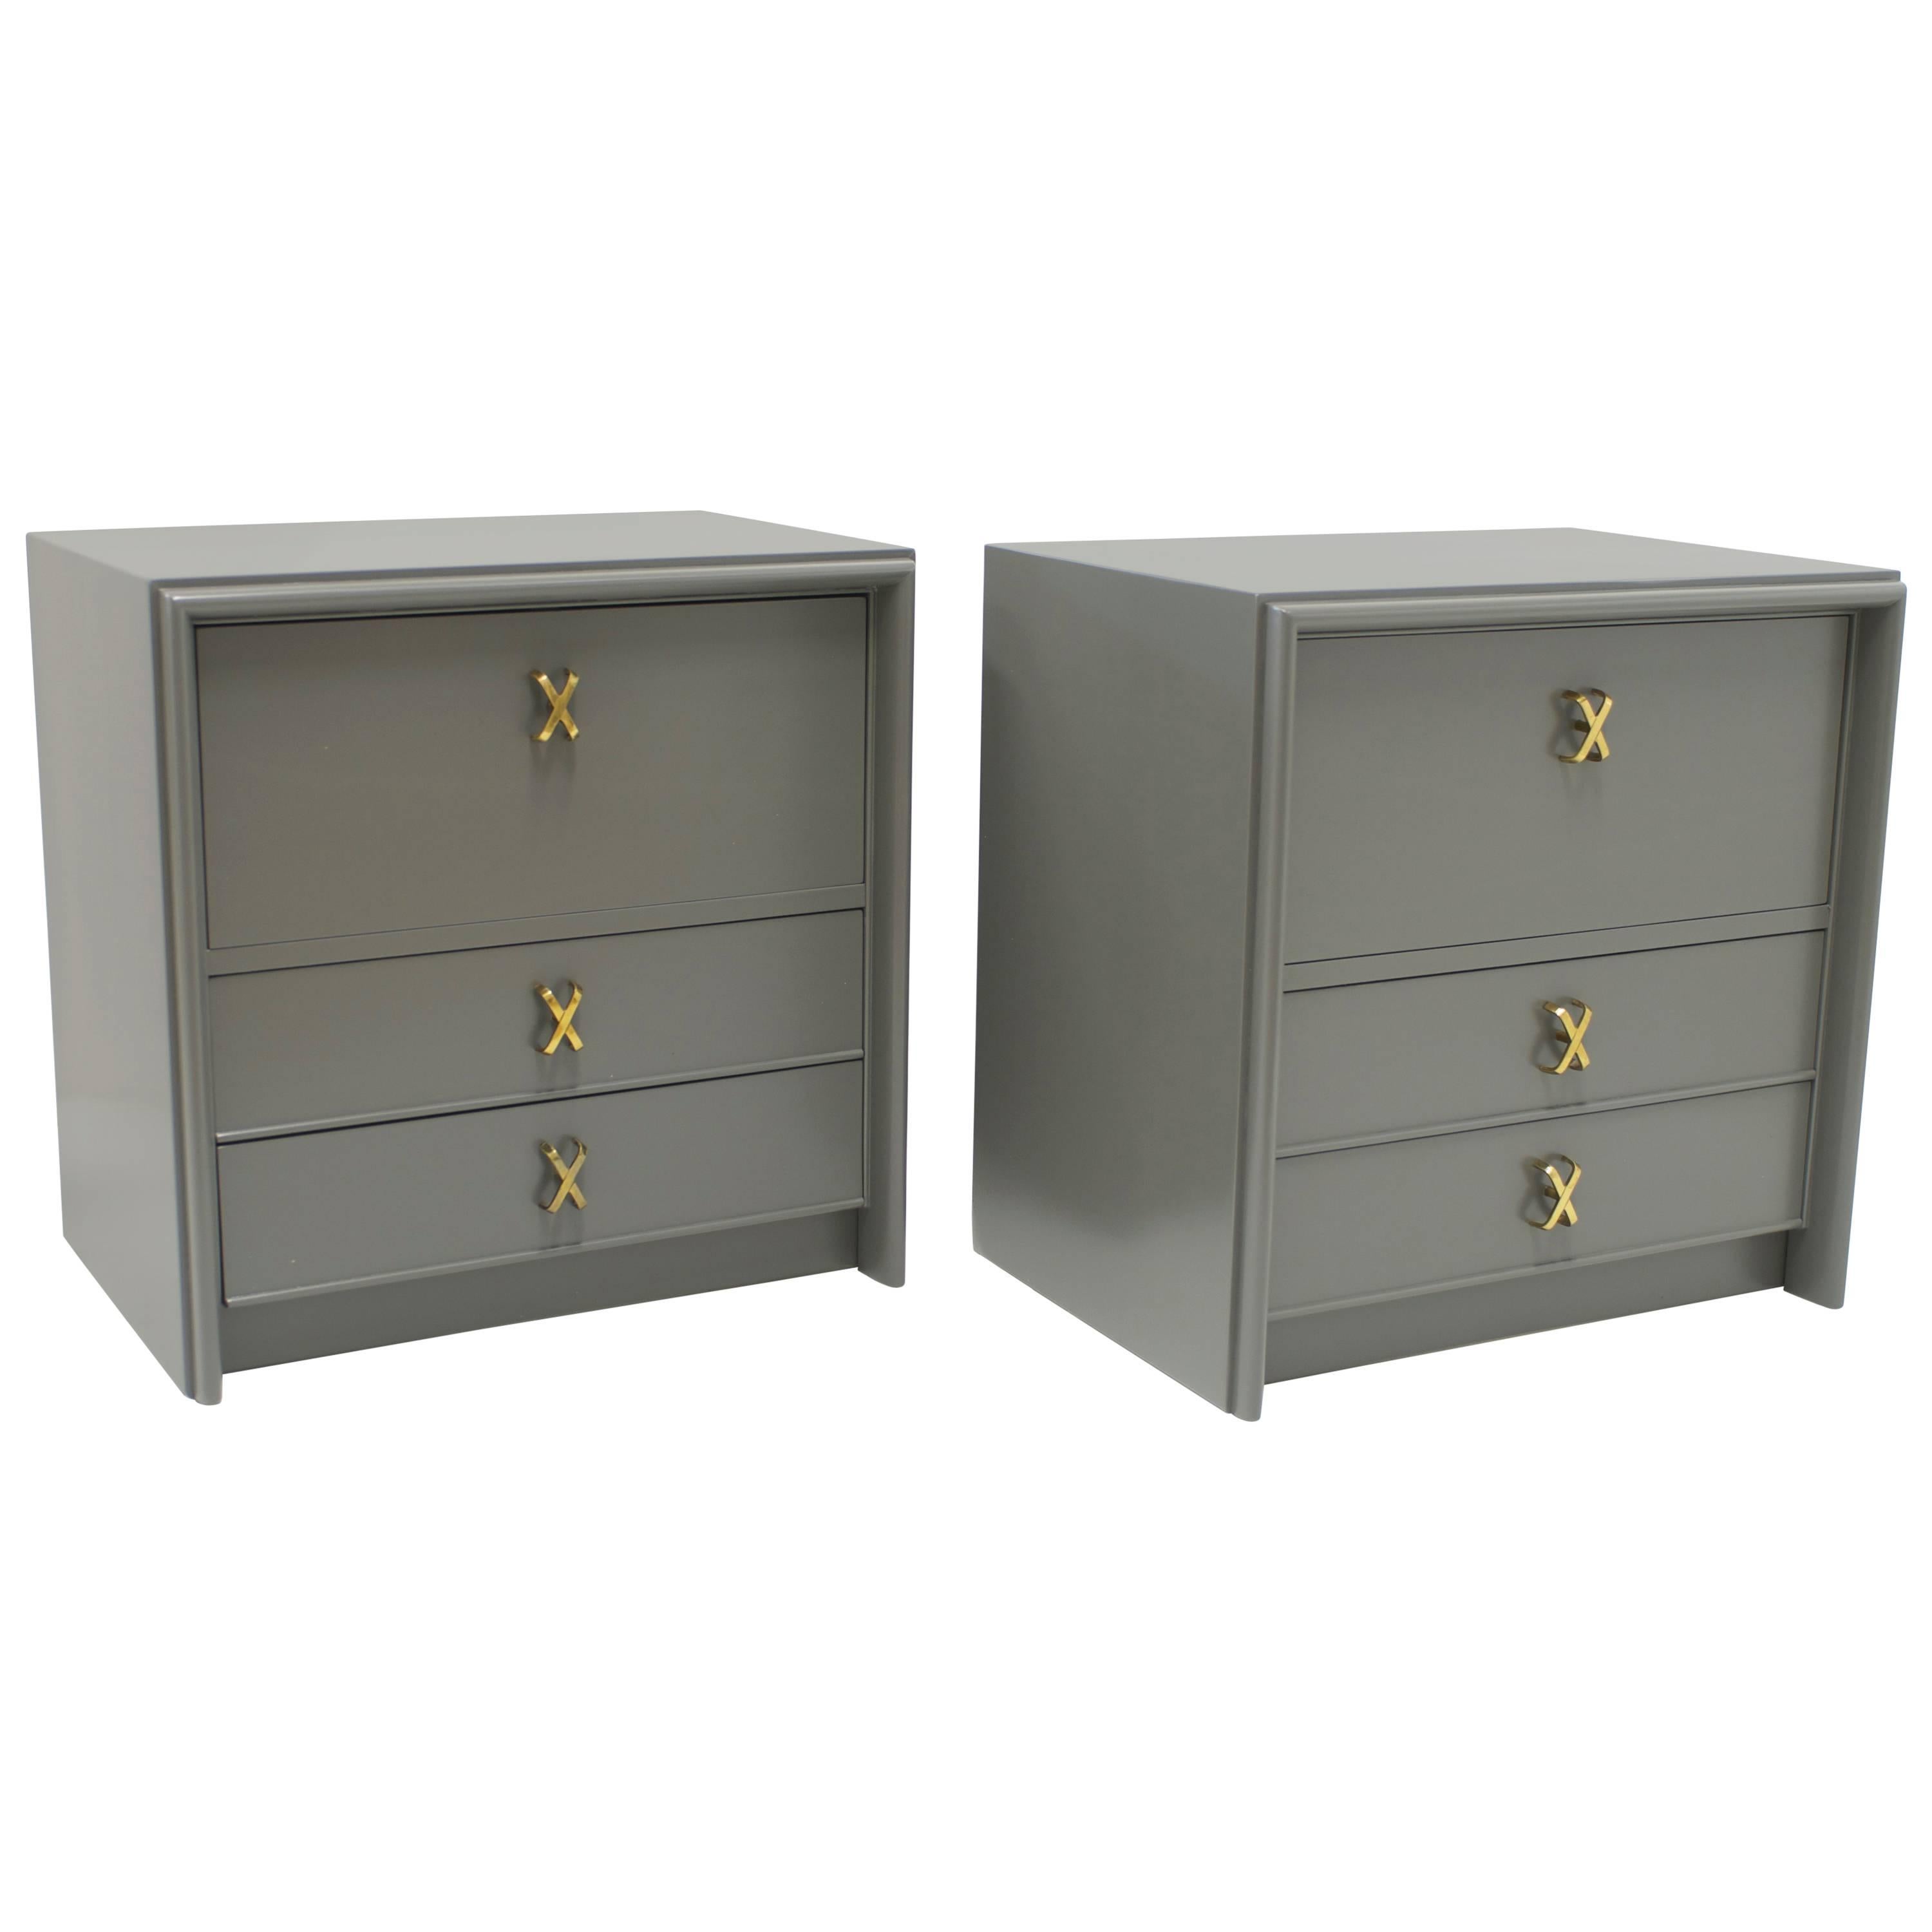 Pair of Grey Paul Frankl Nightstands with Brass X-Pulls